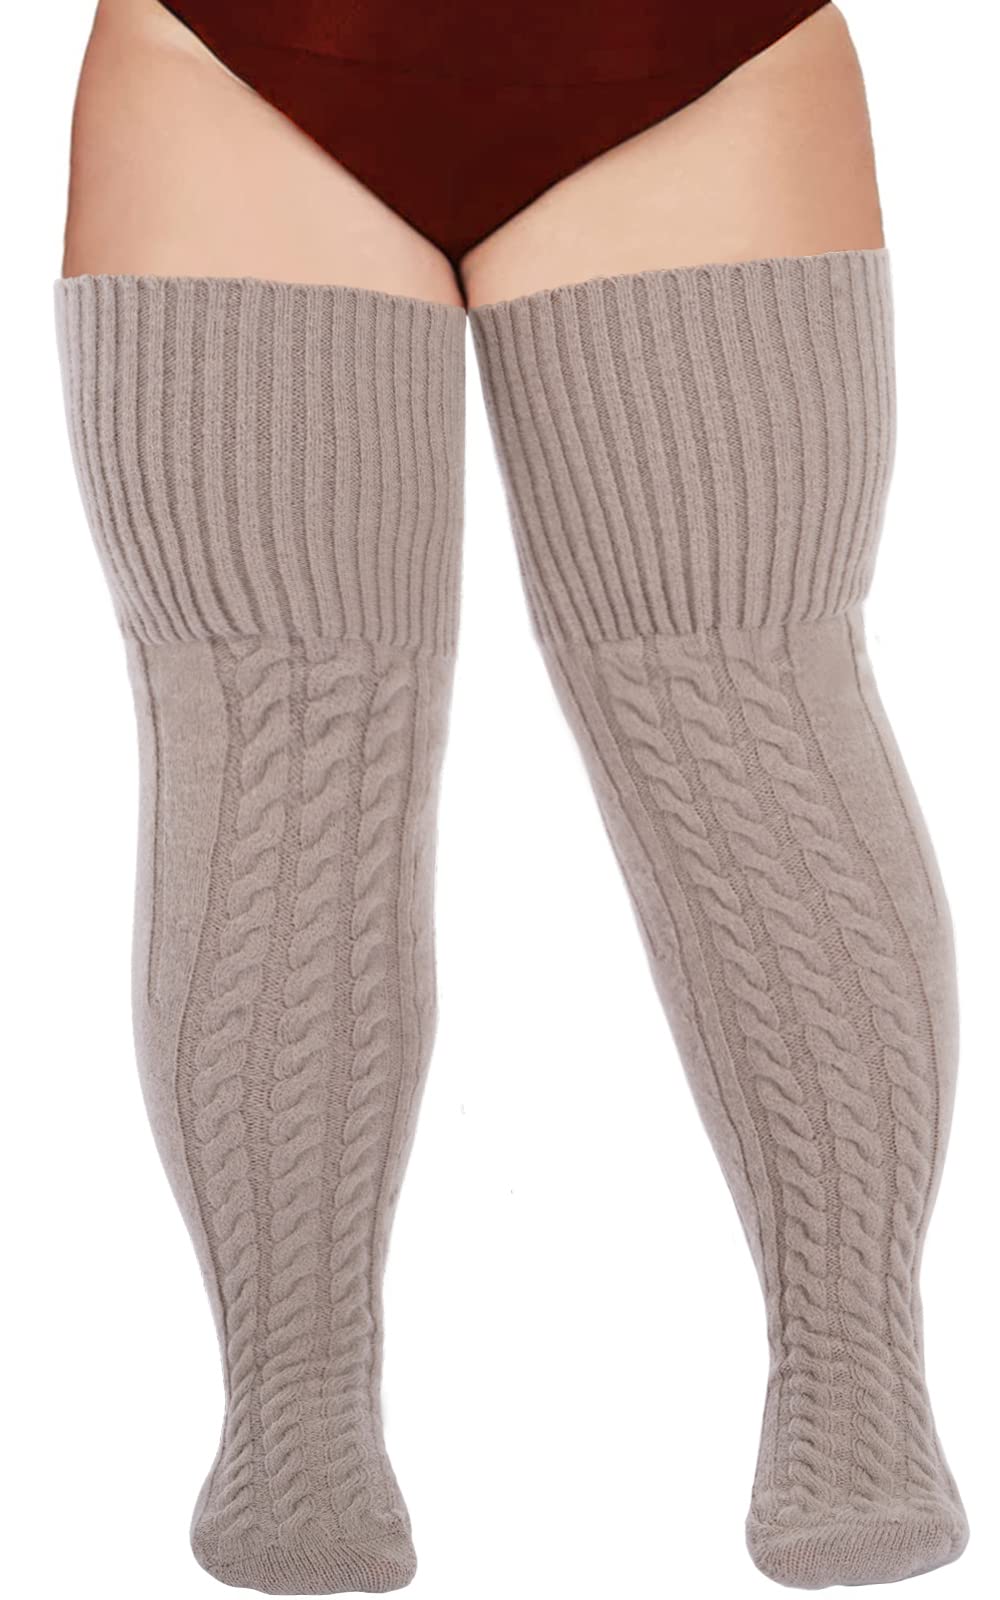 Wool Plus Size Thigh High Socks For Thick Thighs-Beige - Moon Wood